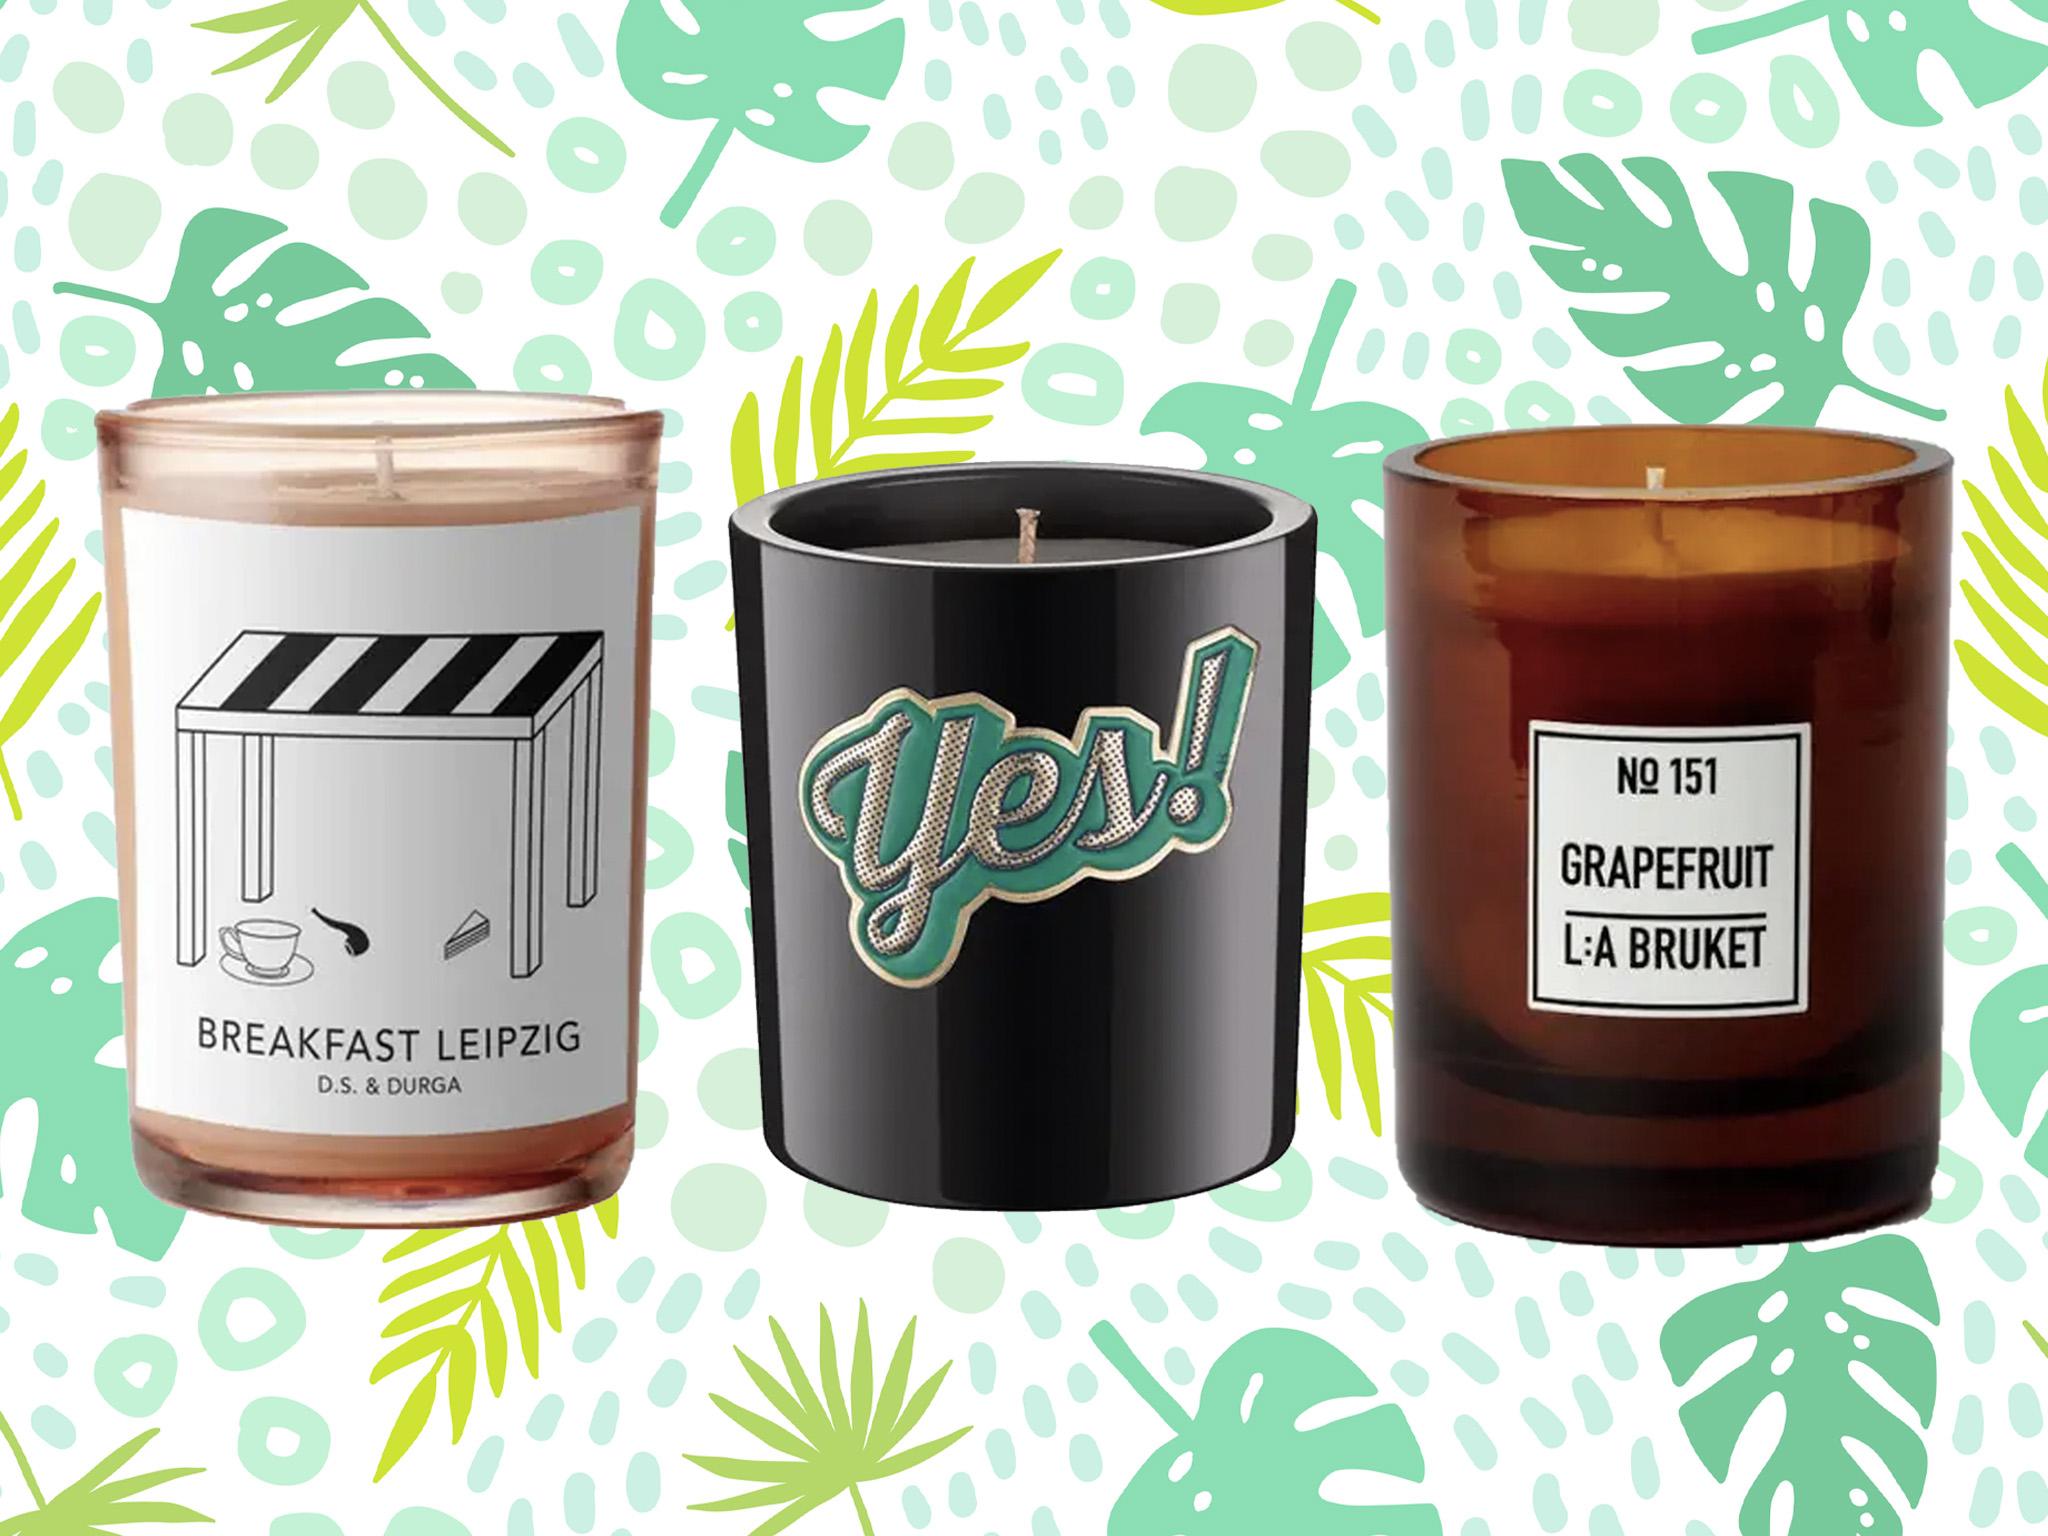 10 Best Ocean Scented Candles With A Sea Breeze Beach Smell